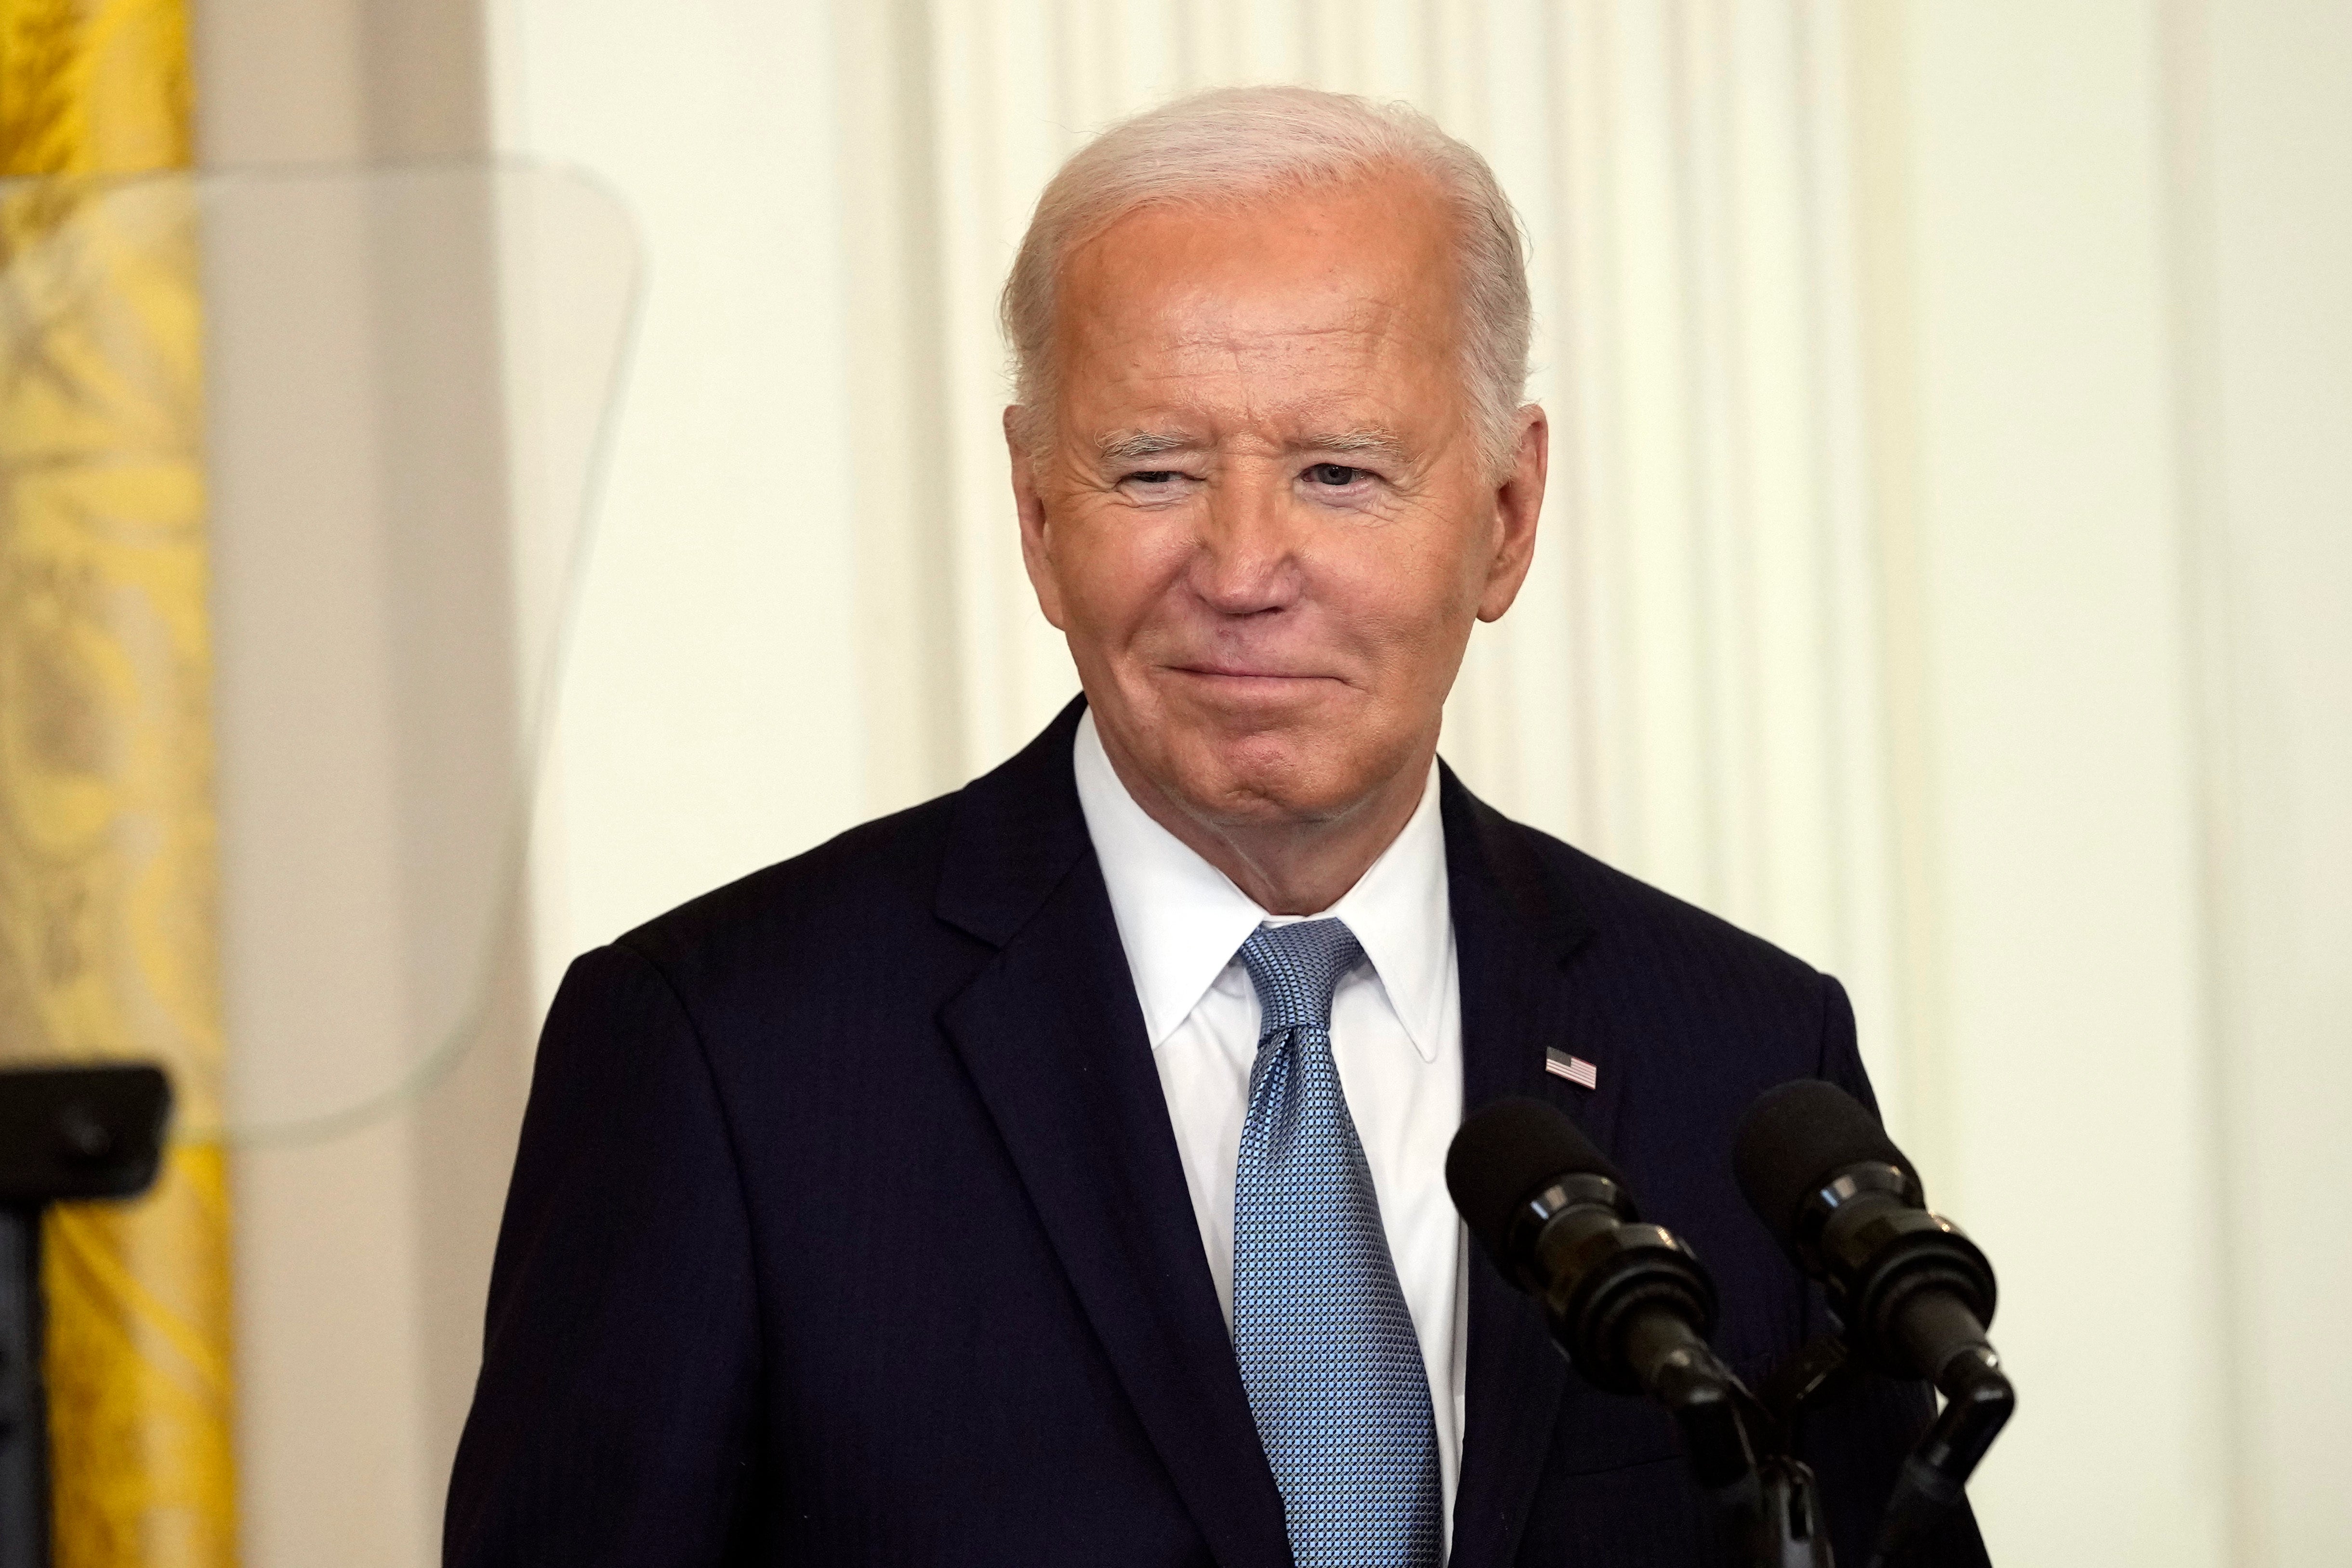 President Biden is facing calls for him to stand down from his re-election bid after a terrible performance in last week’s debate